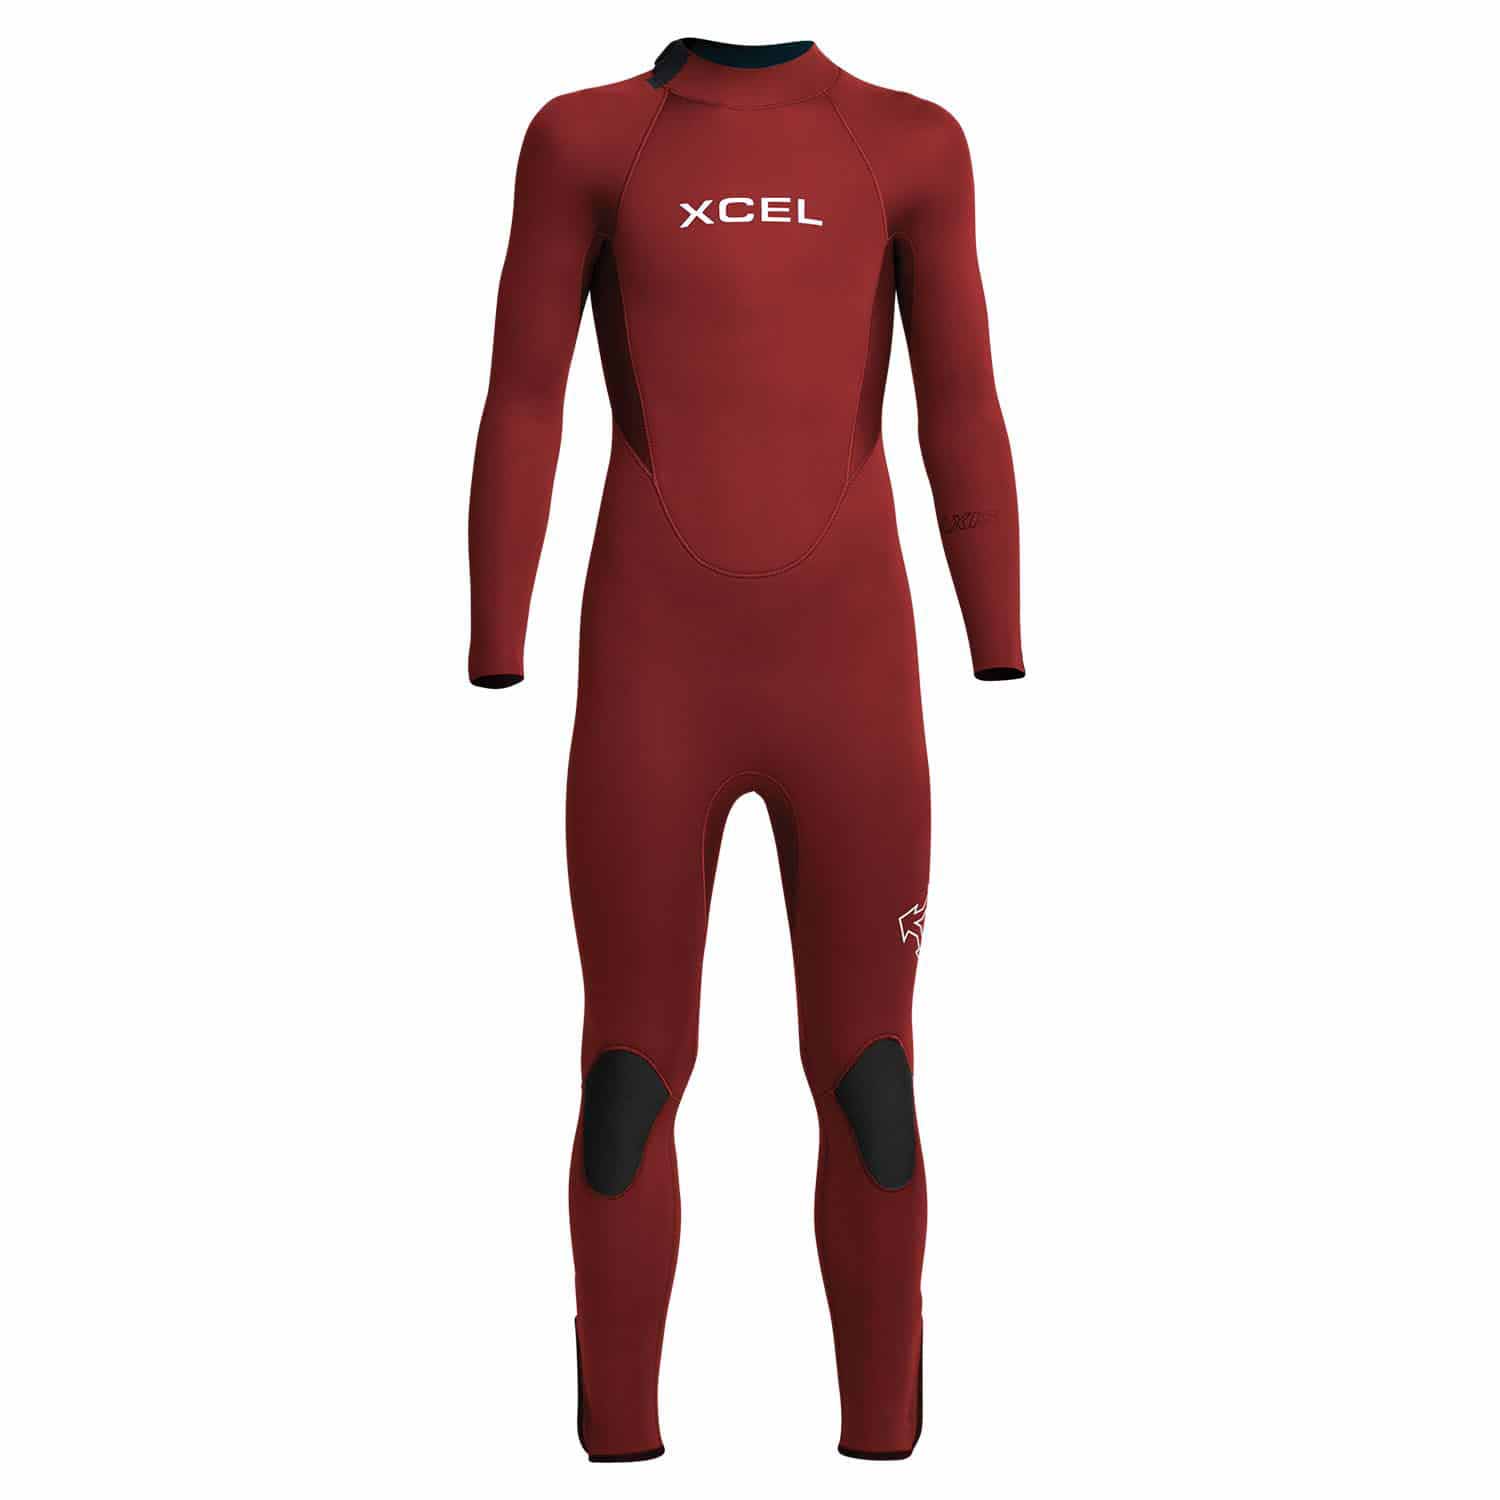 Xcel Youth 3/2mm Axis Back Zip Kids Wetsuit - Chilli Pepper - Kids Full Length Wetsuit by Xcel